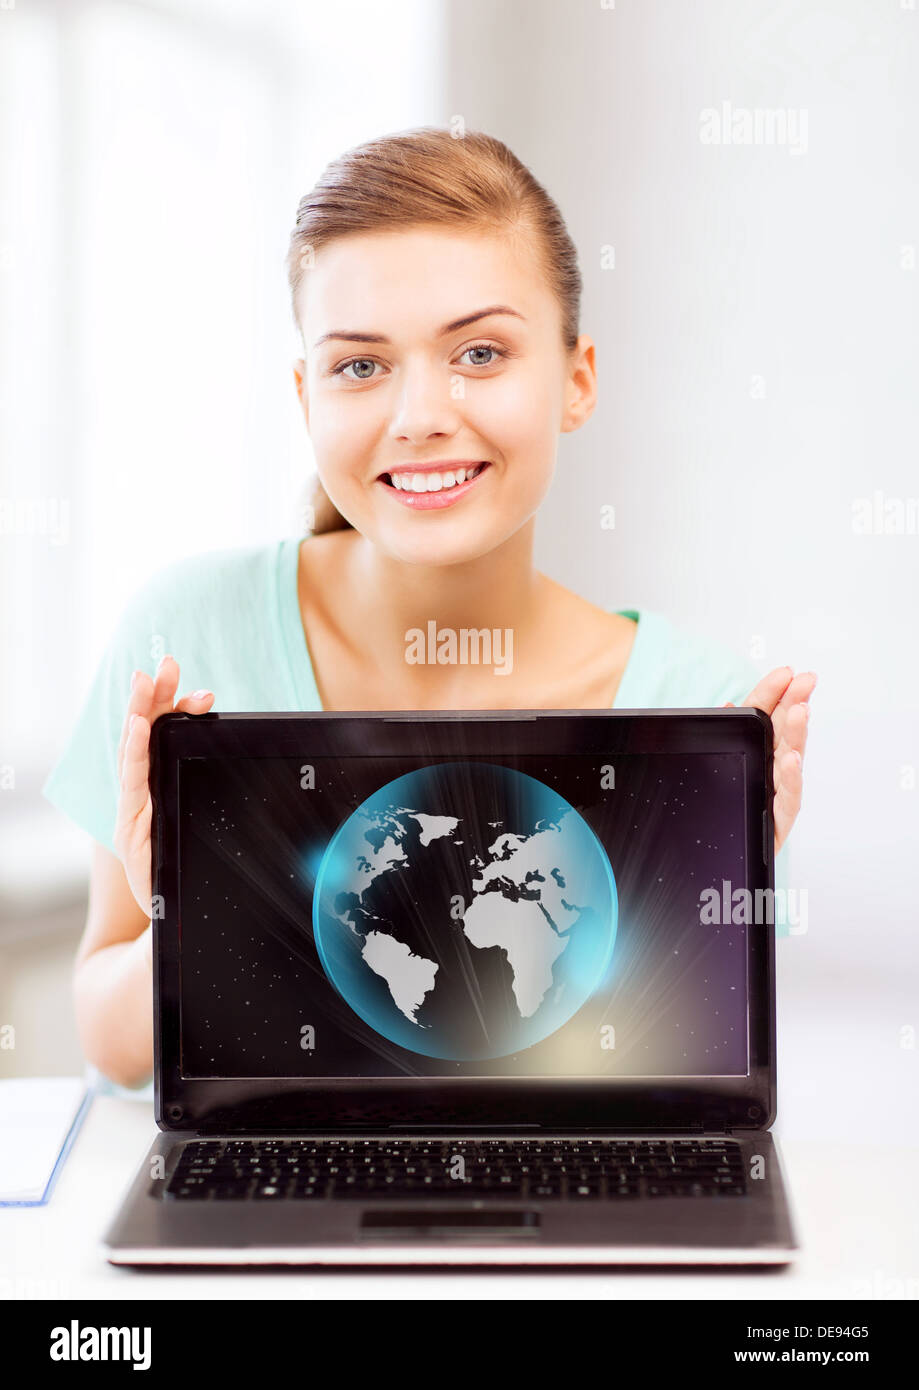 woman with laptop and sphere globe Stock Photo